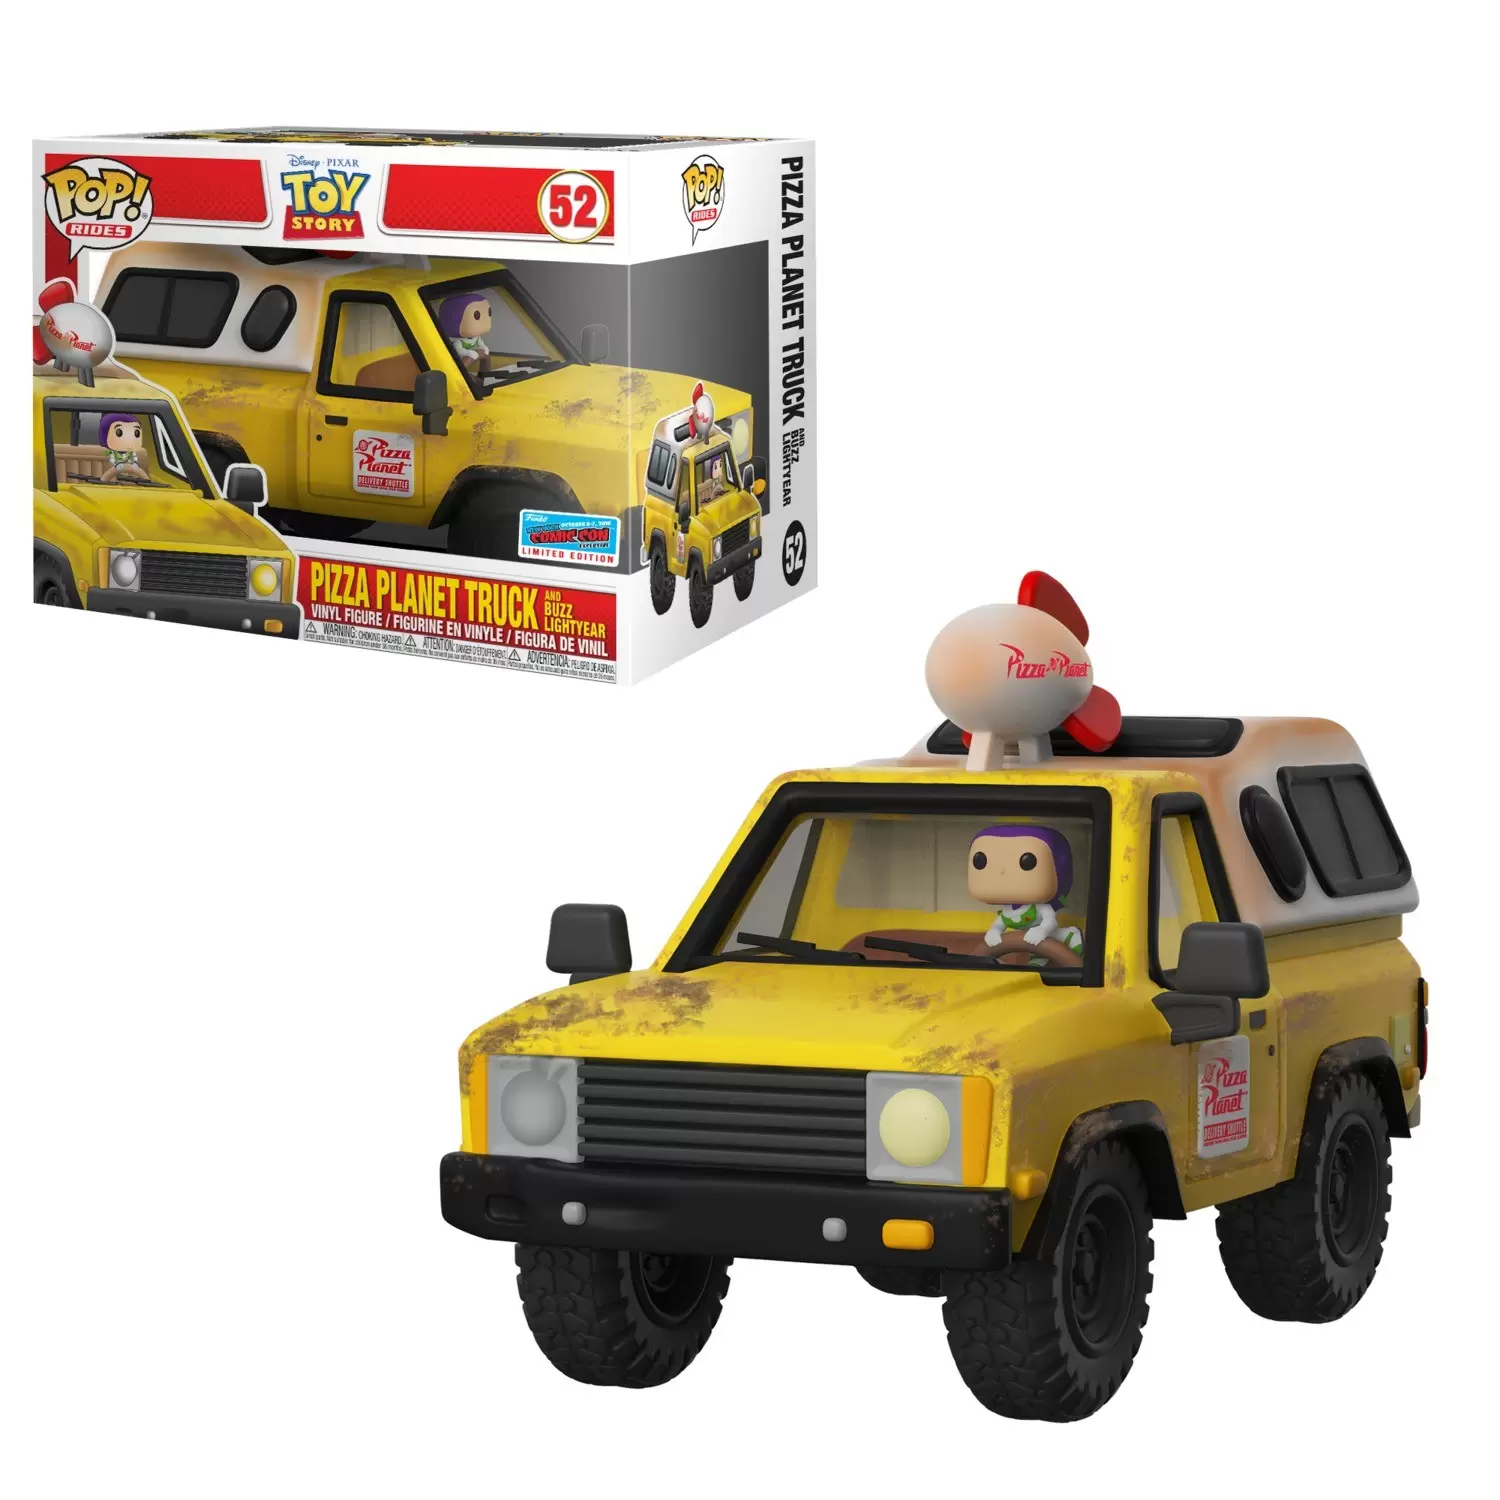 POP! Rides - Toy Story - Pizza Planet Truck and Buzz Lightyear